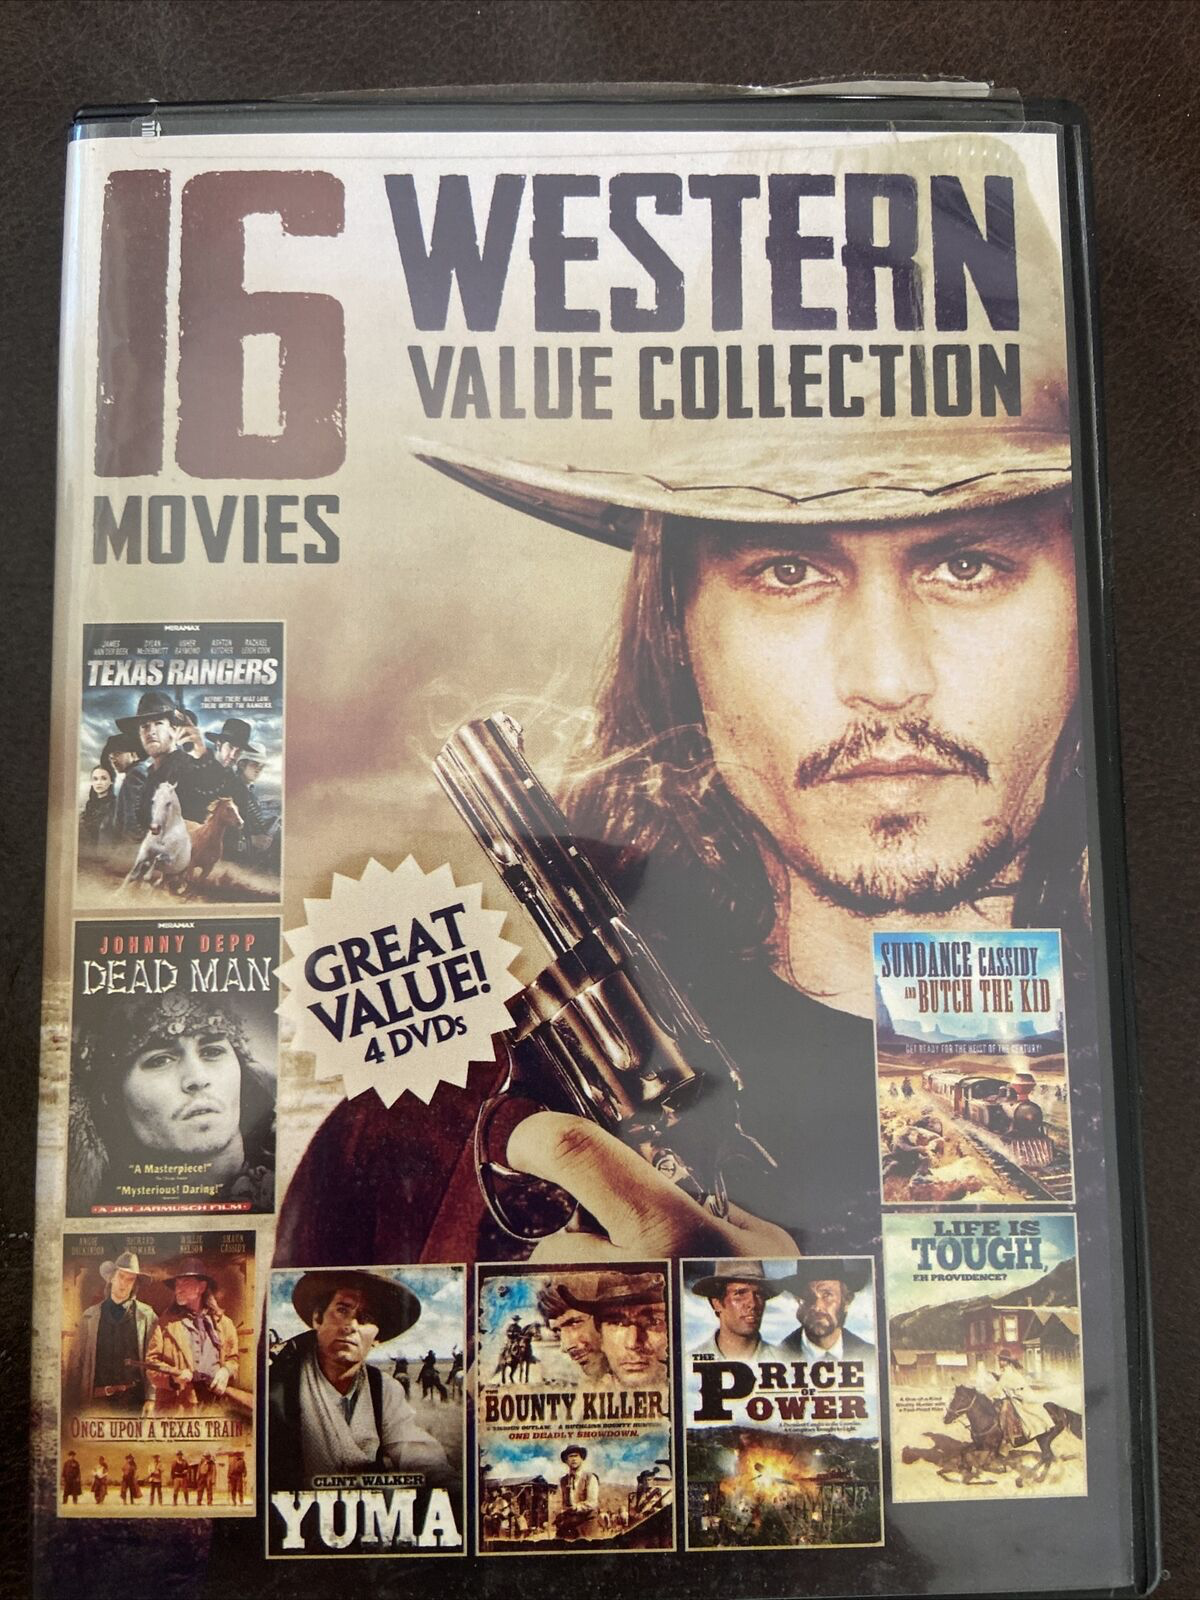 16-Movie Western Value Collection - DVD